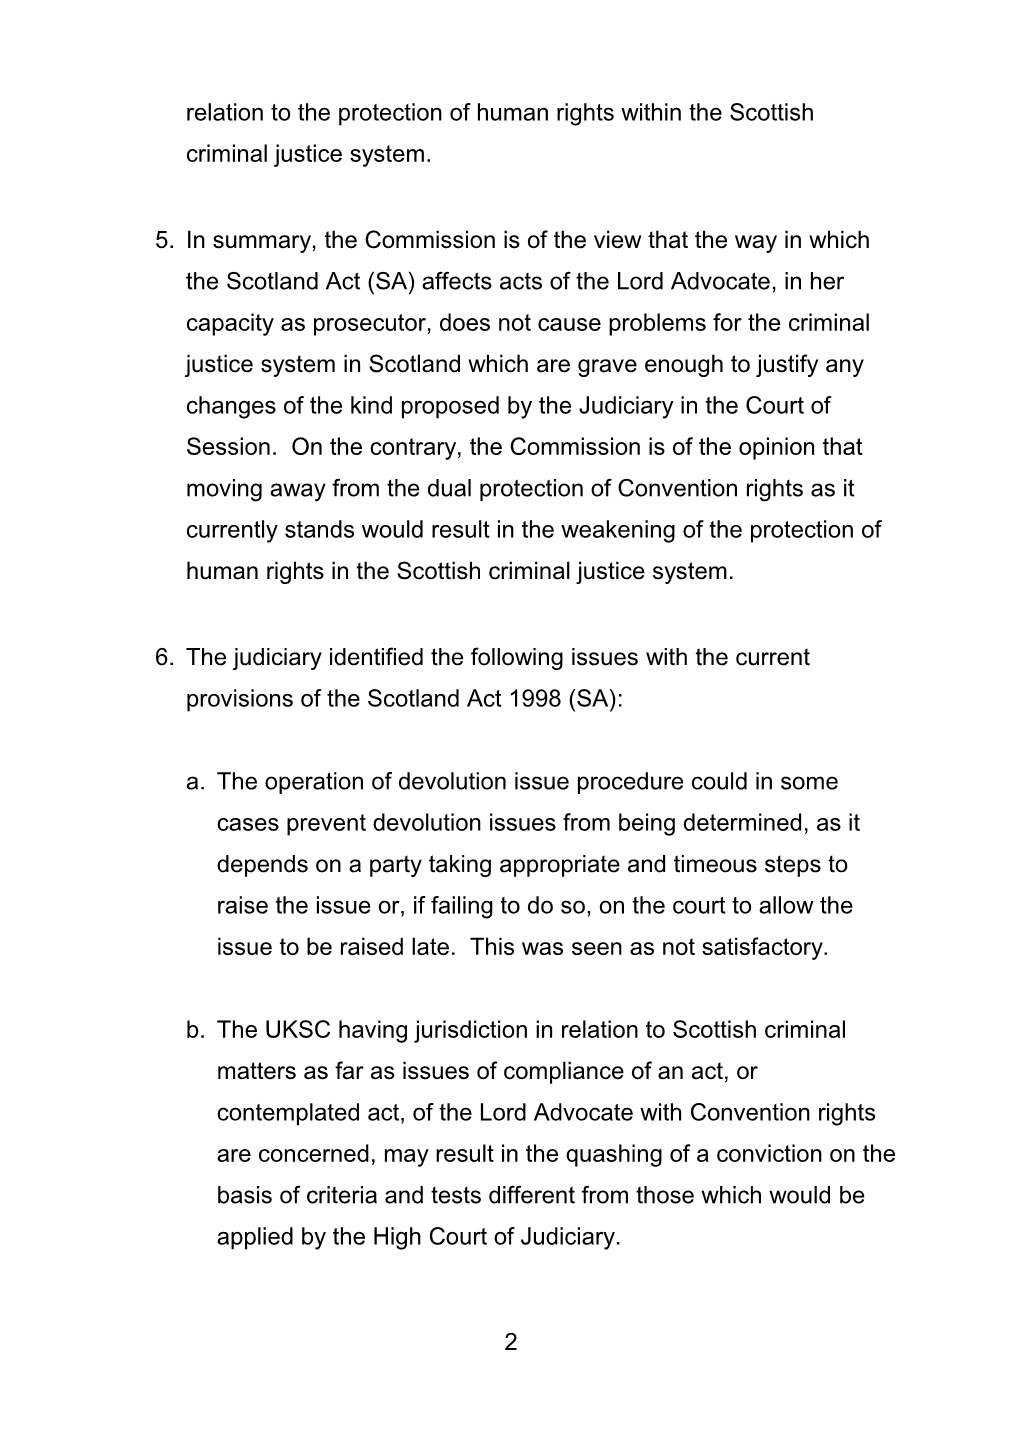 Devolution Issues and Acts of the Lord Advocate